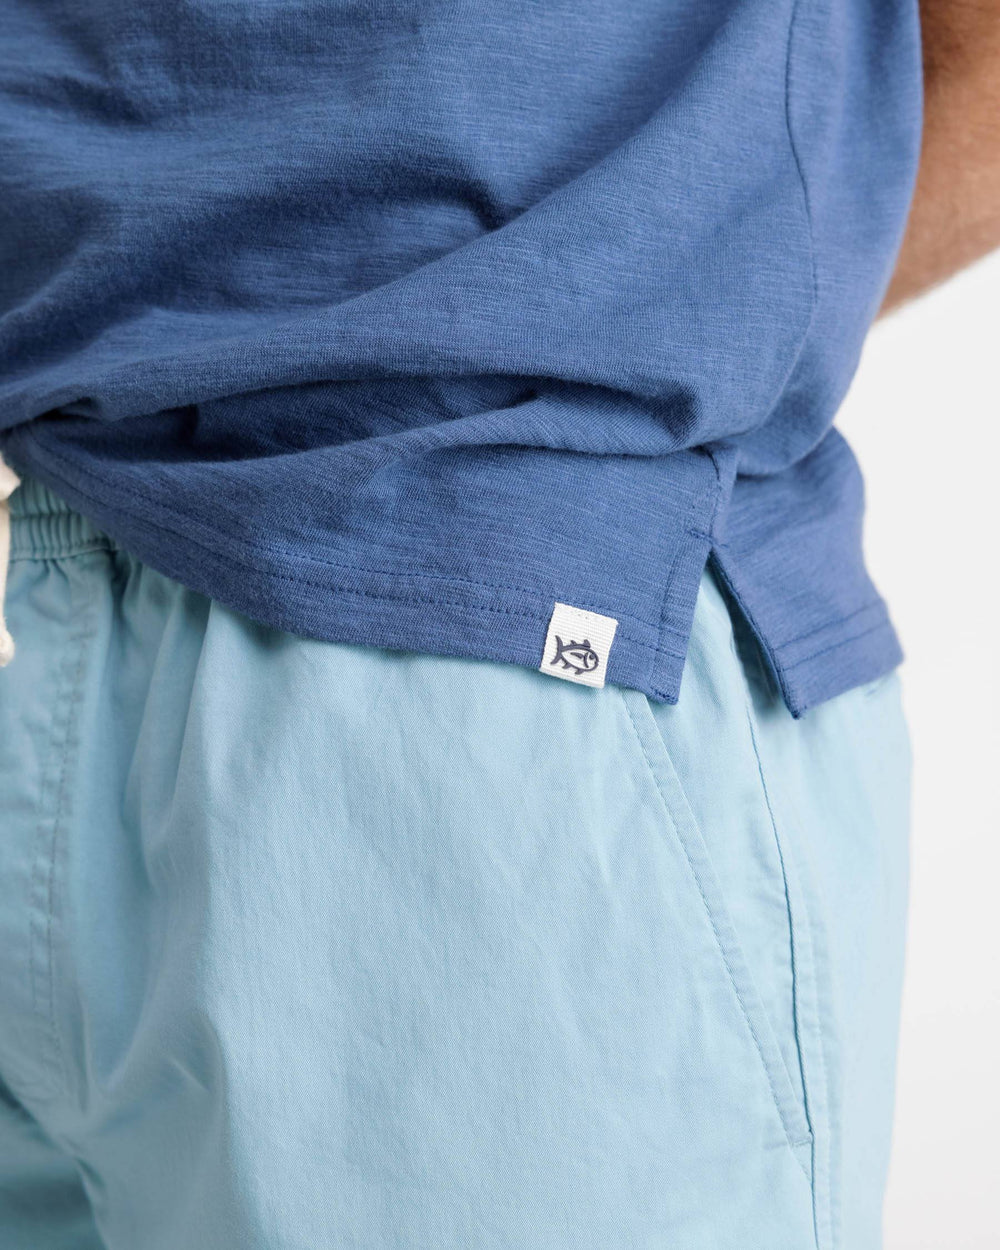 The label view of the Southern Tide Mesa Sun Farer Polo Shirt by Southern Tide - Aged Denim